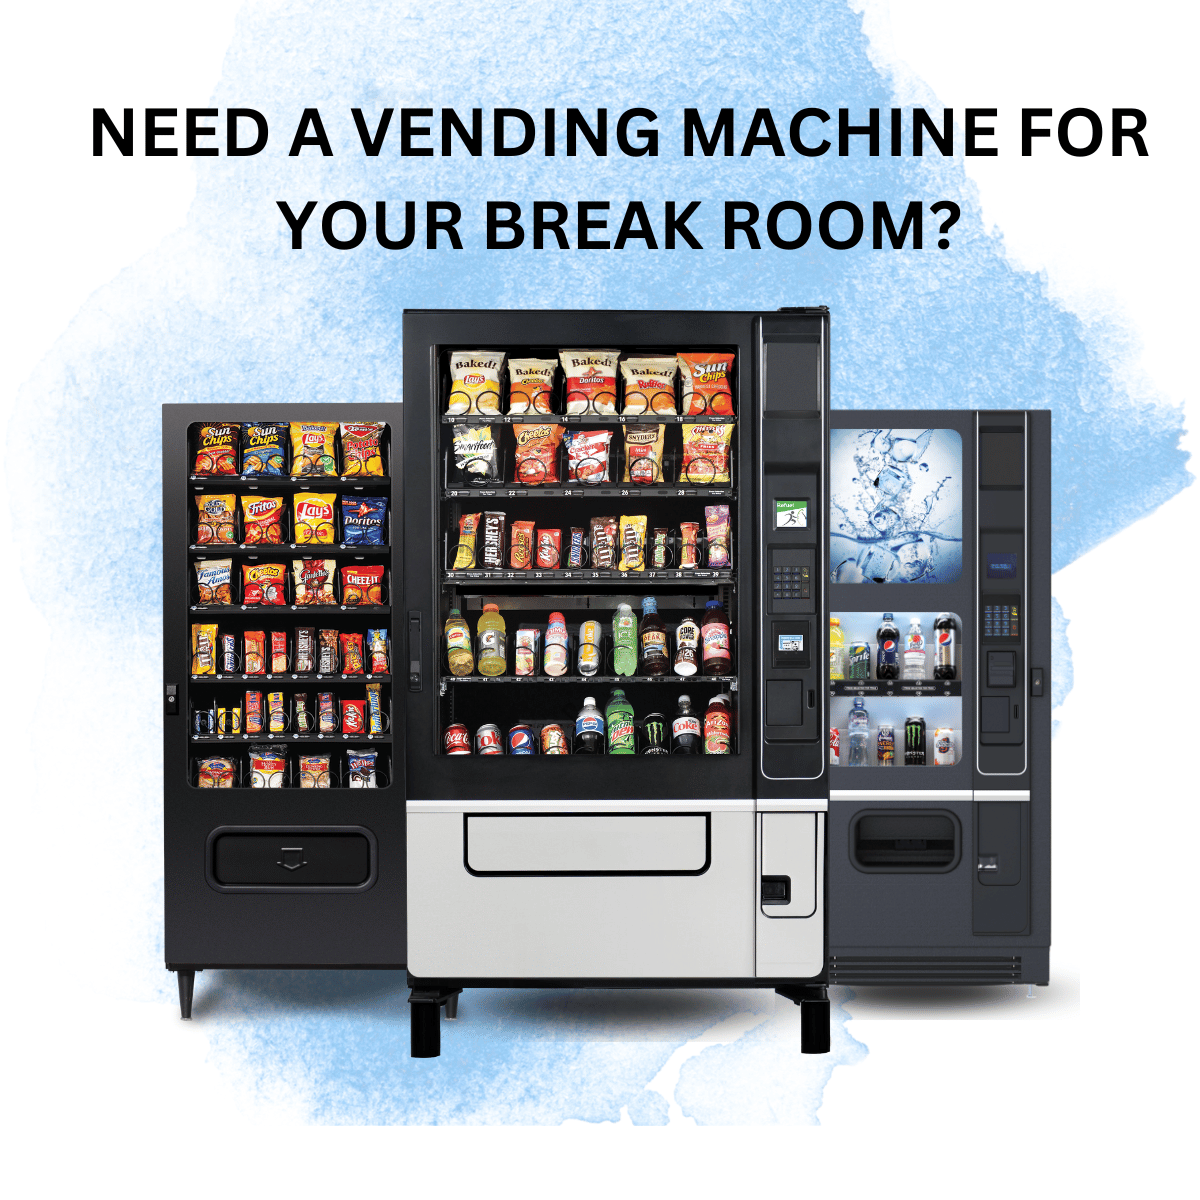 DO YOU NEED A SNACK MACHINE FOR YOUR BREAK ROOM?